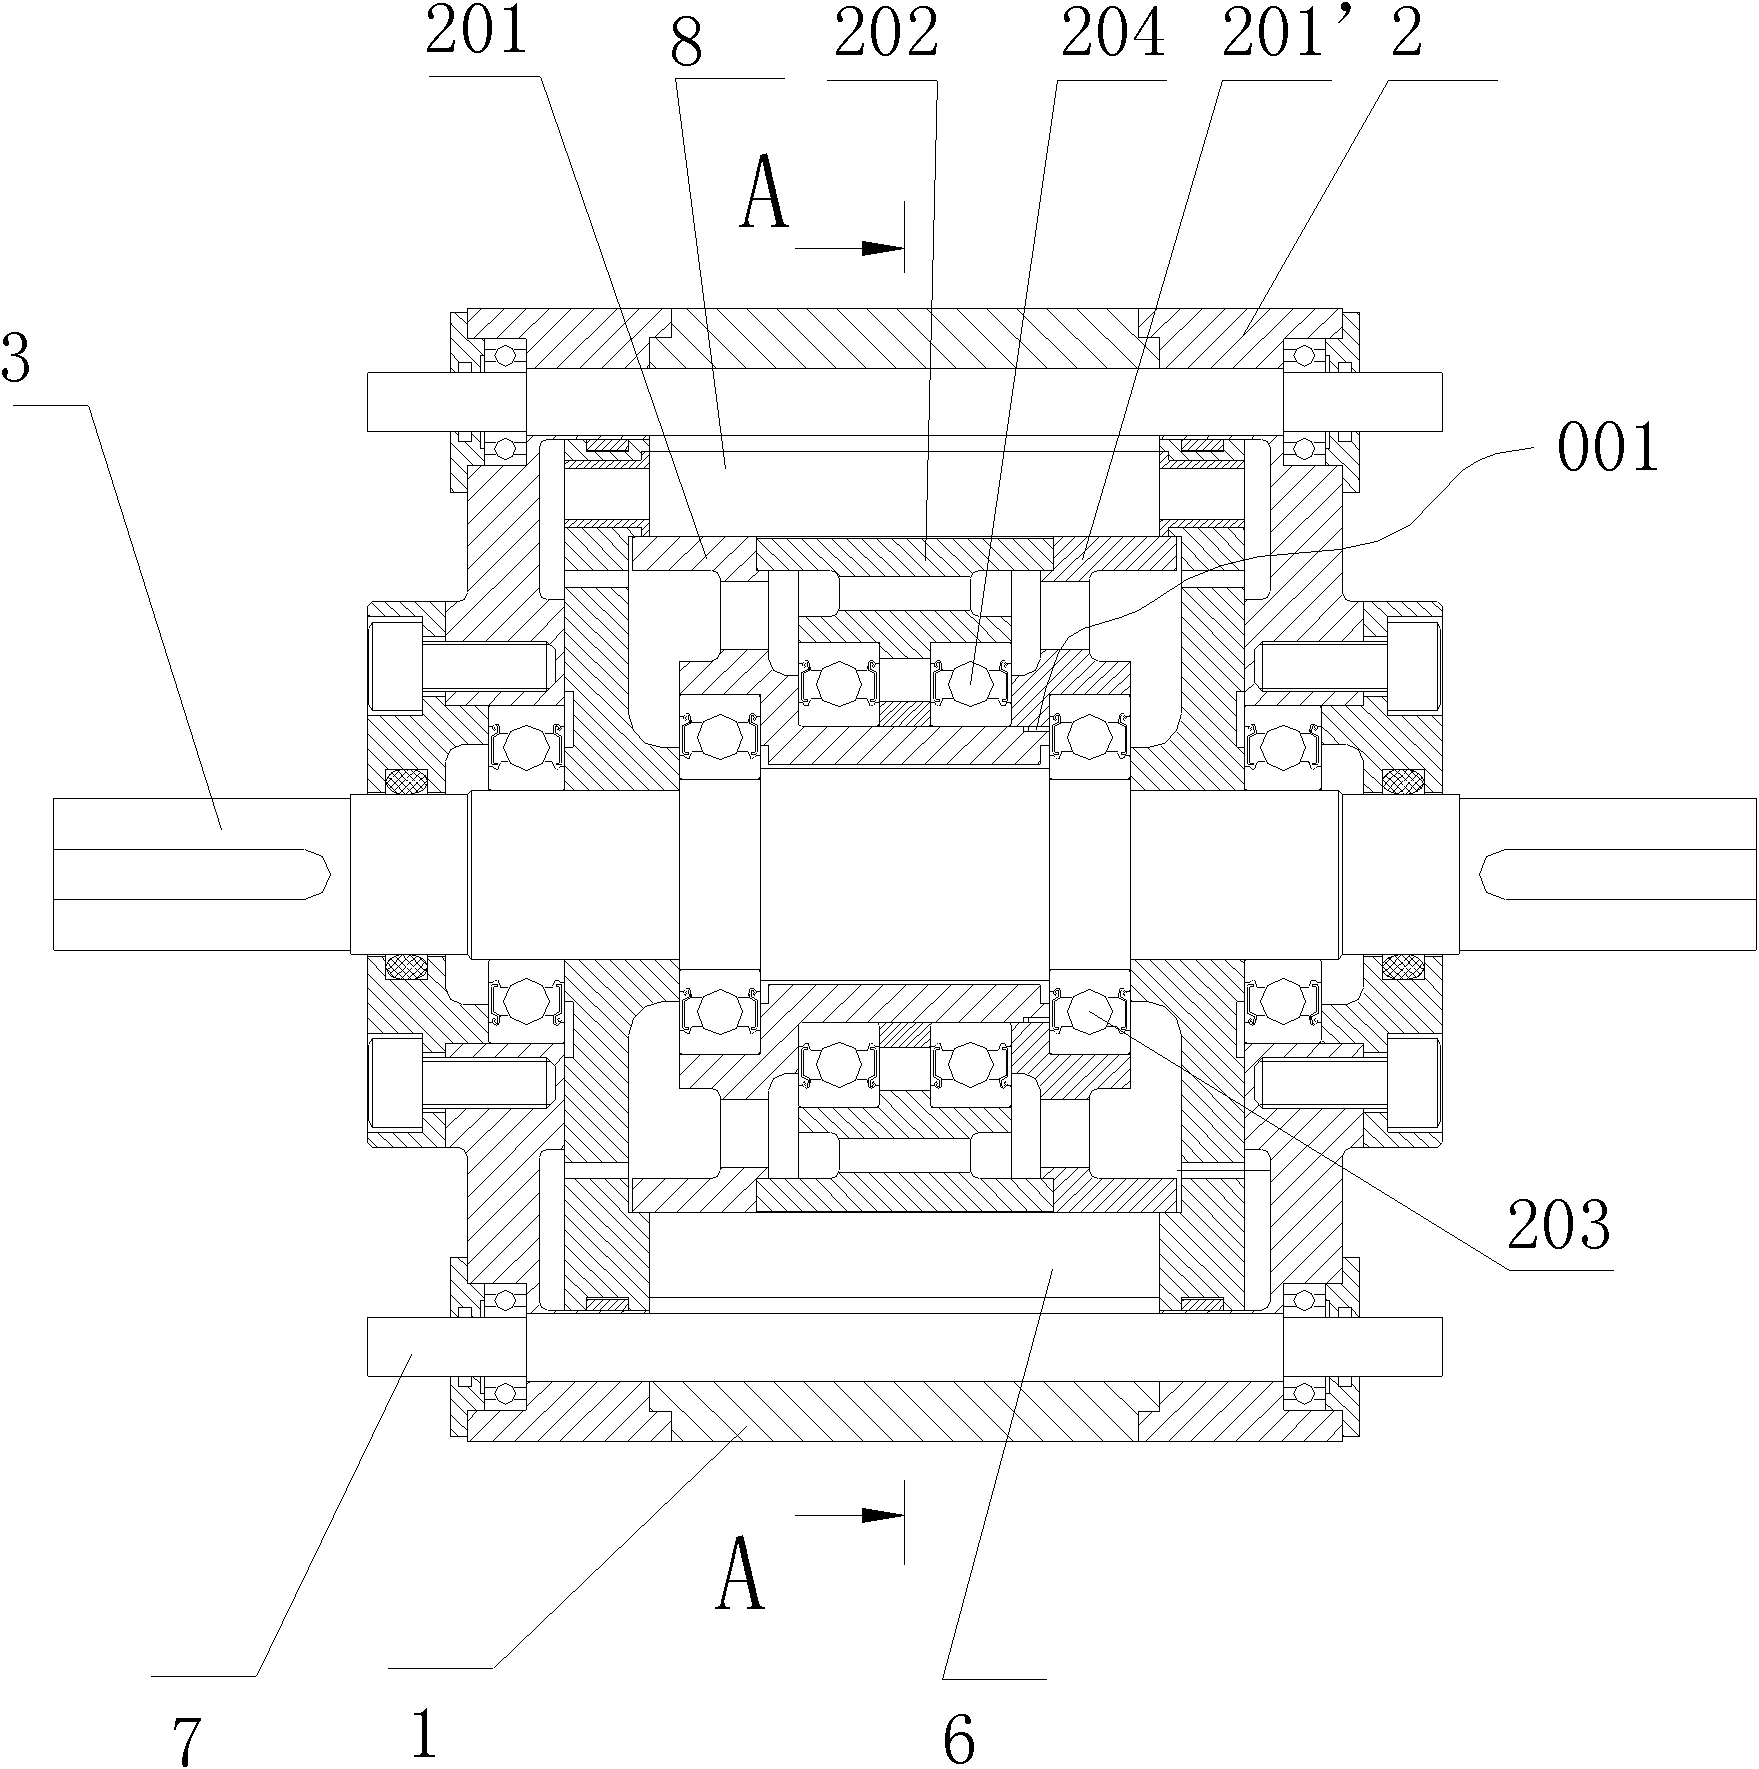 Star-spinning type rotation device with double sun wheels, engine and fluid machine